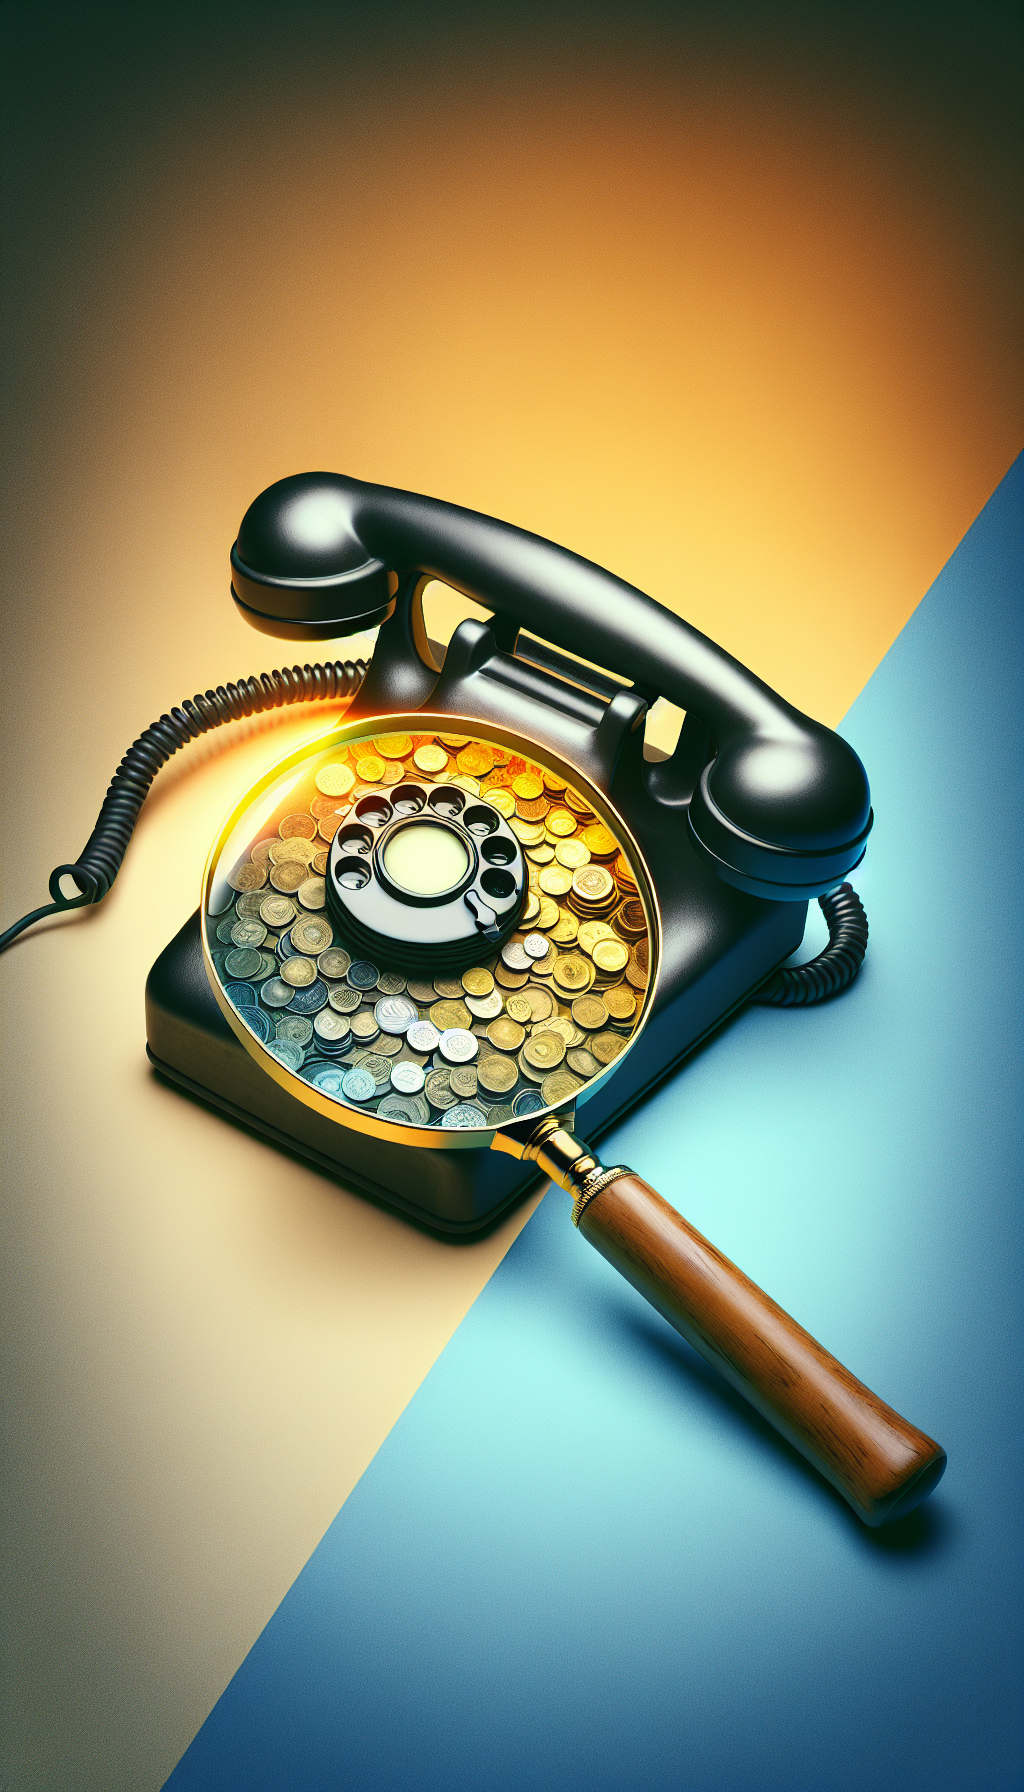 An illustration of a classic rotary dial telephone on a graded background that transitions from pristine to cracked and tarnished. A magnifying glass hovers over the phone, symbolizing detailed assessment, with clear fragments inside the lens showing the phone's key features in mint condition, while areas outside the lens appear weathered. Golden coins spill from the handset, indicating the telephone's value.